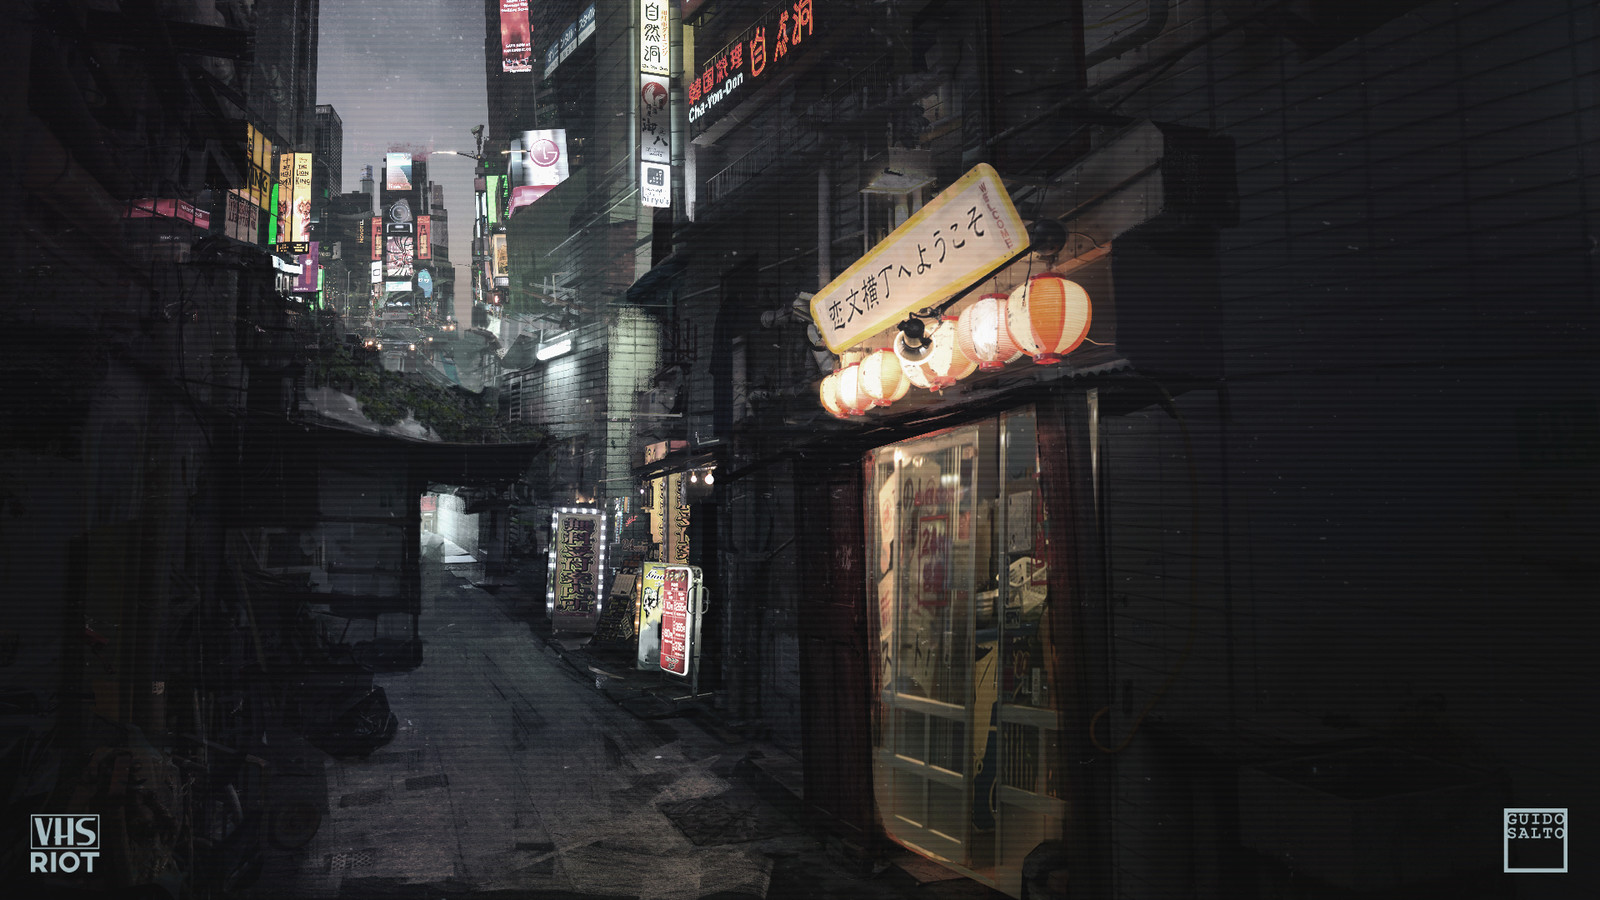 Quick Photobash of a street Level View